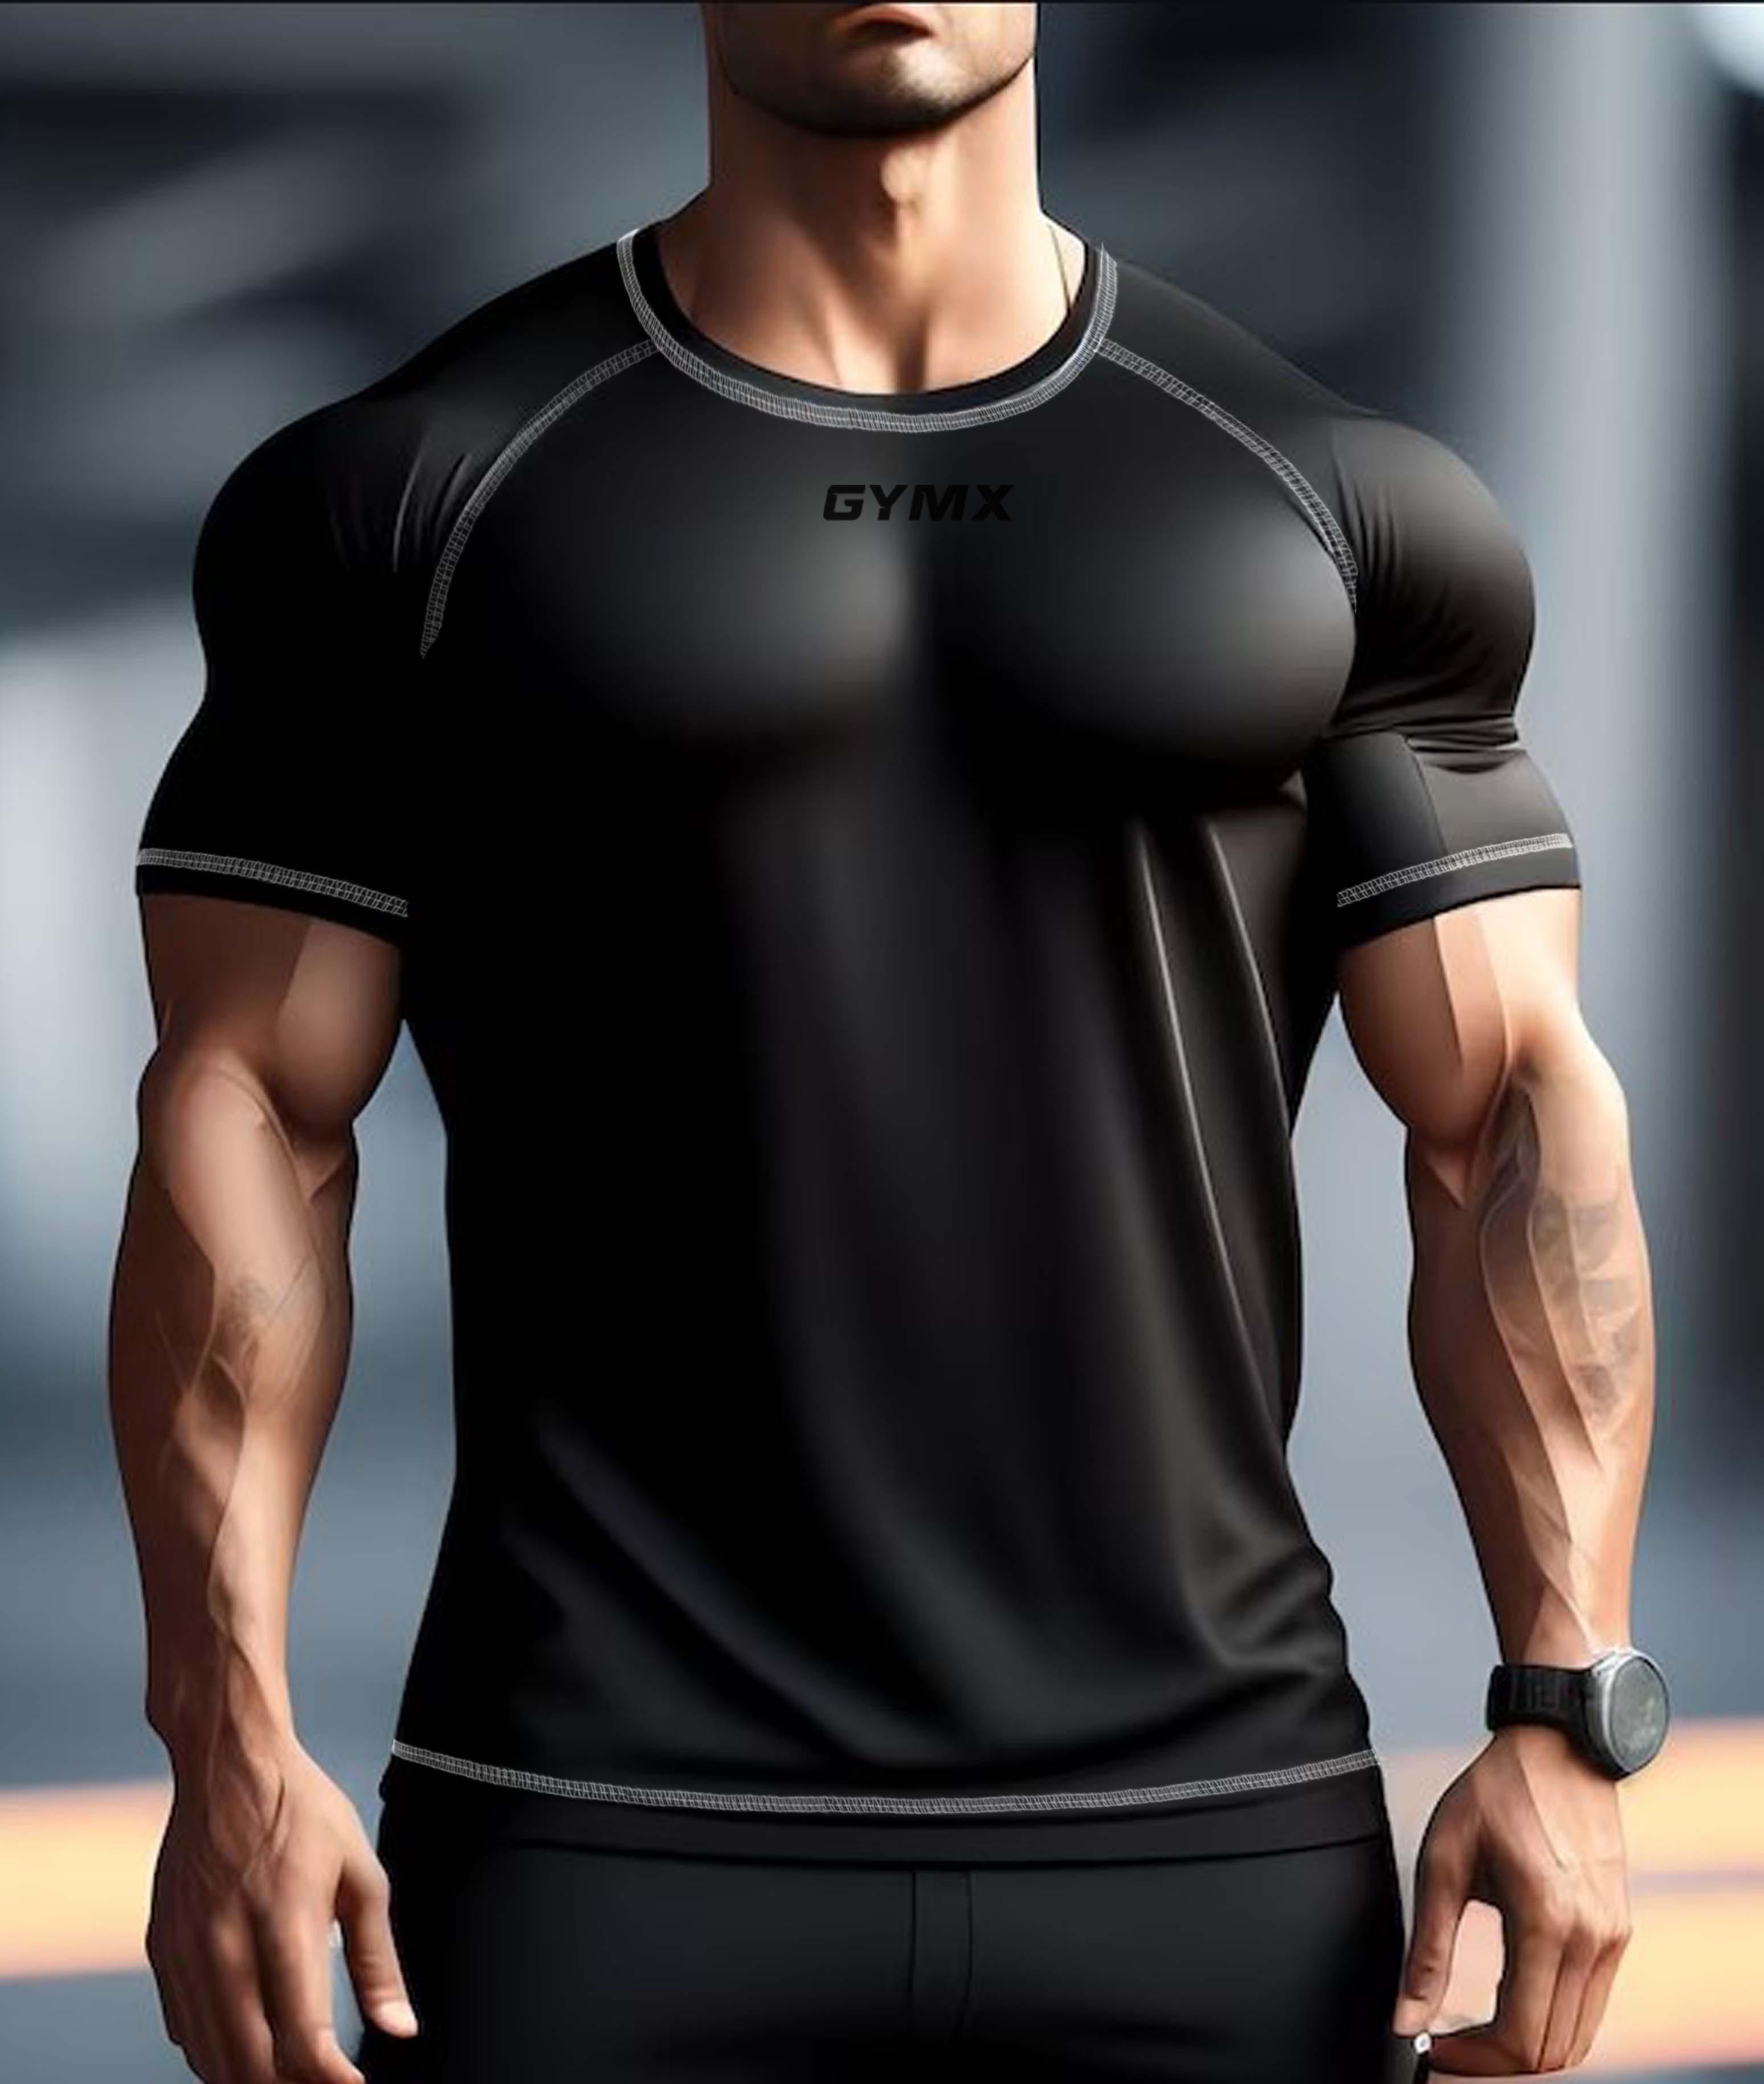 Gymx Clothing And Accessories - Buy Gymx Clothing And Accessories